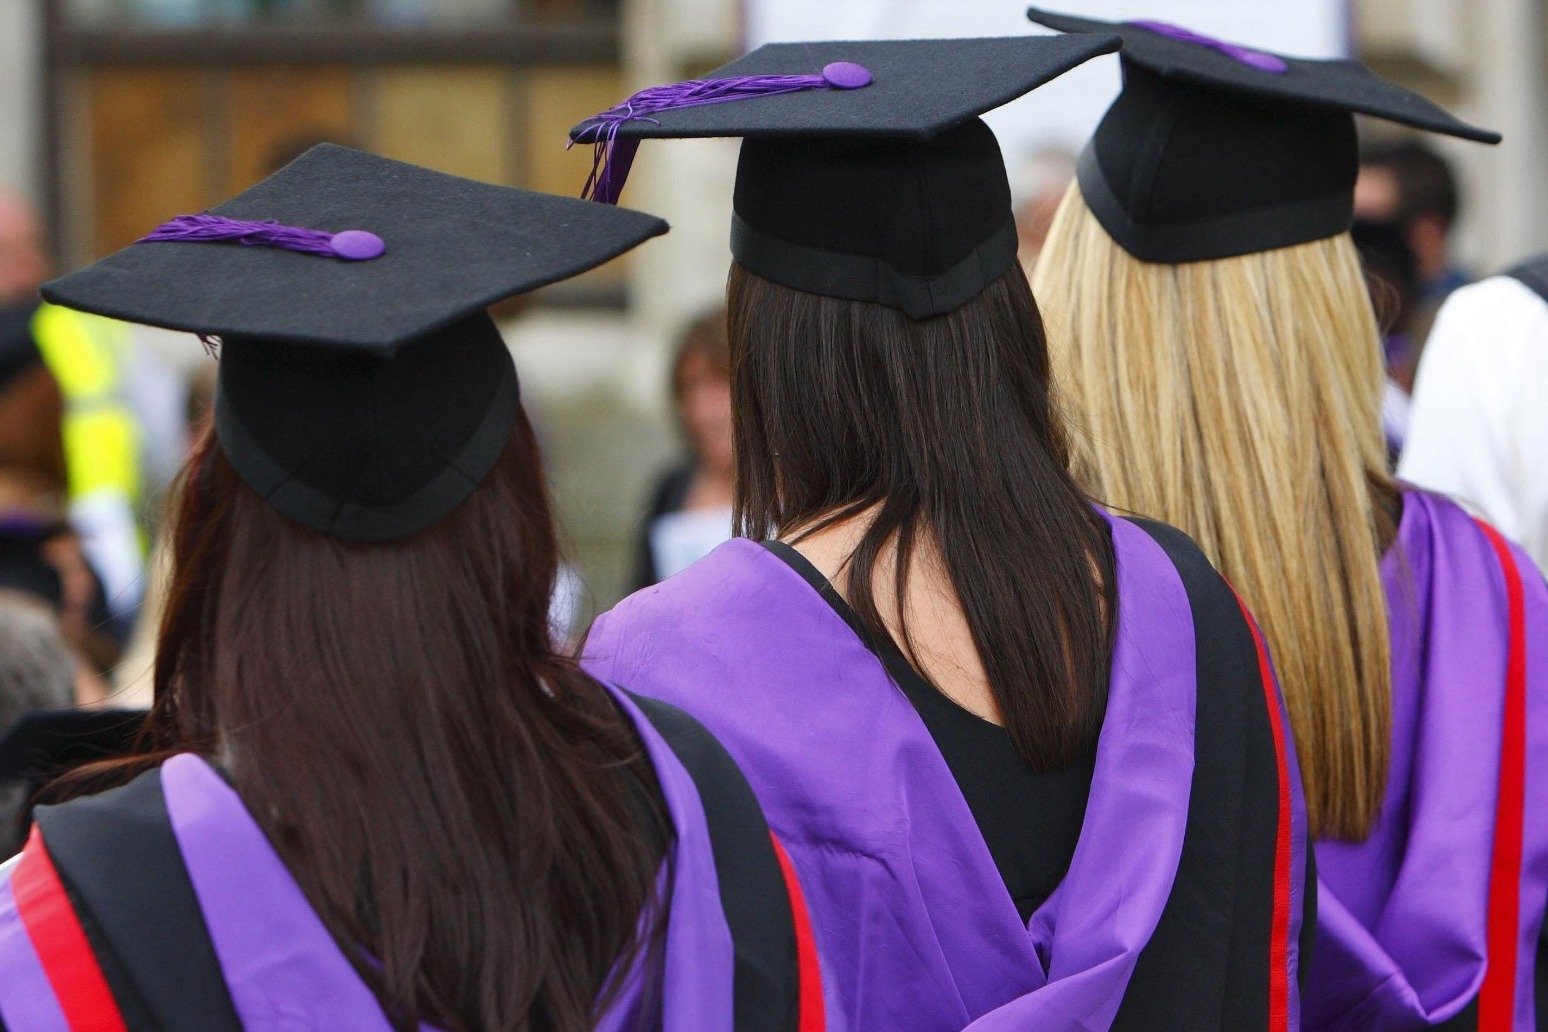 Government cuts student loan interest rates again amid rising inflation